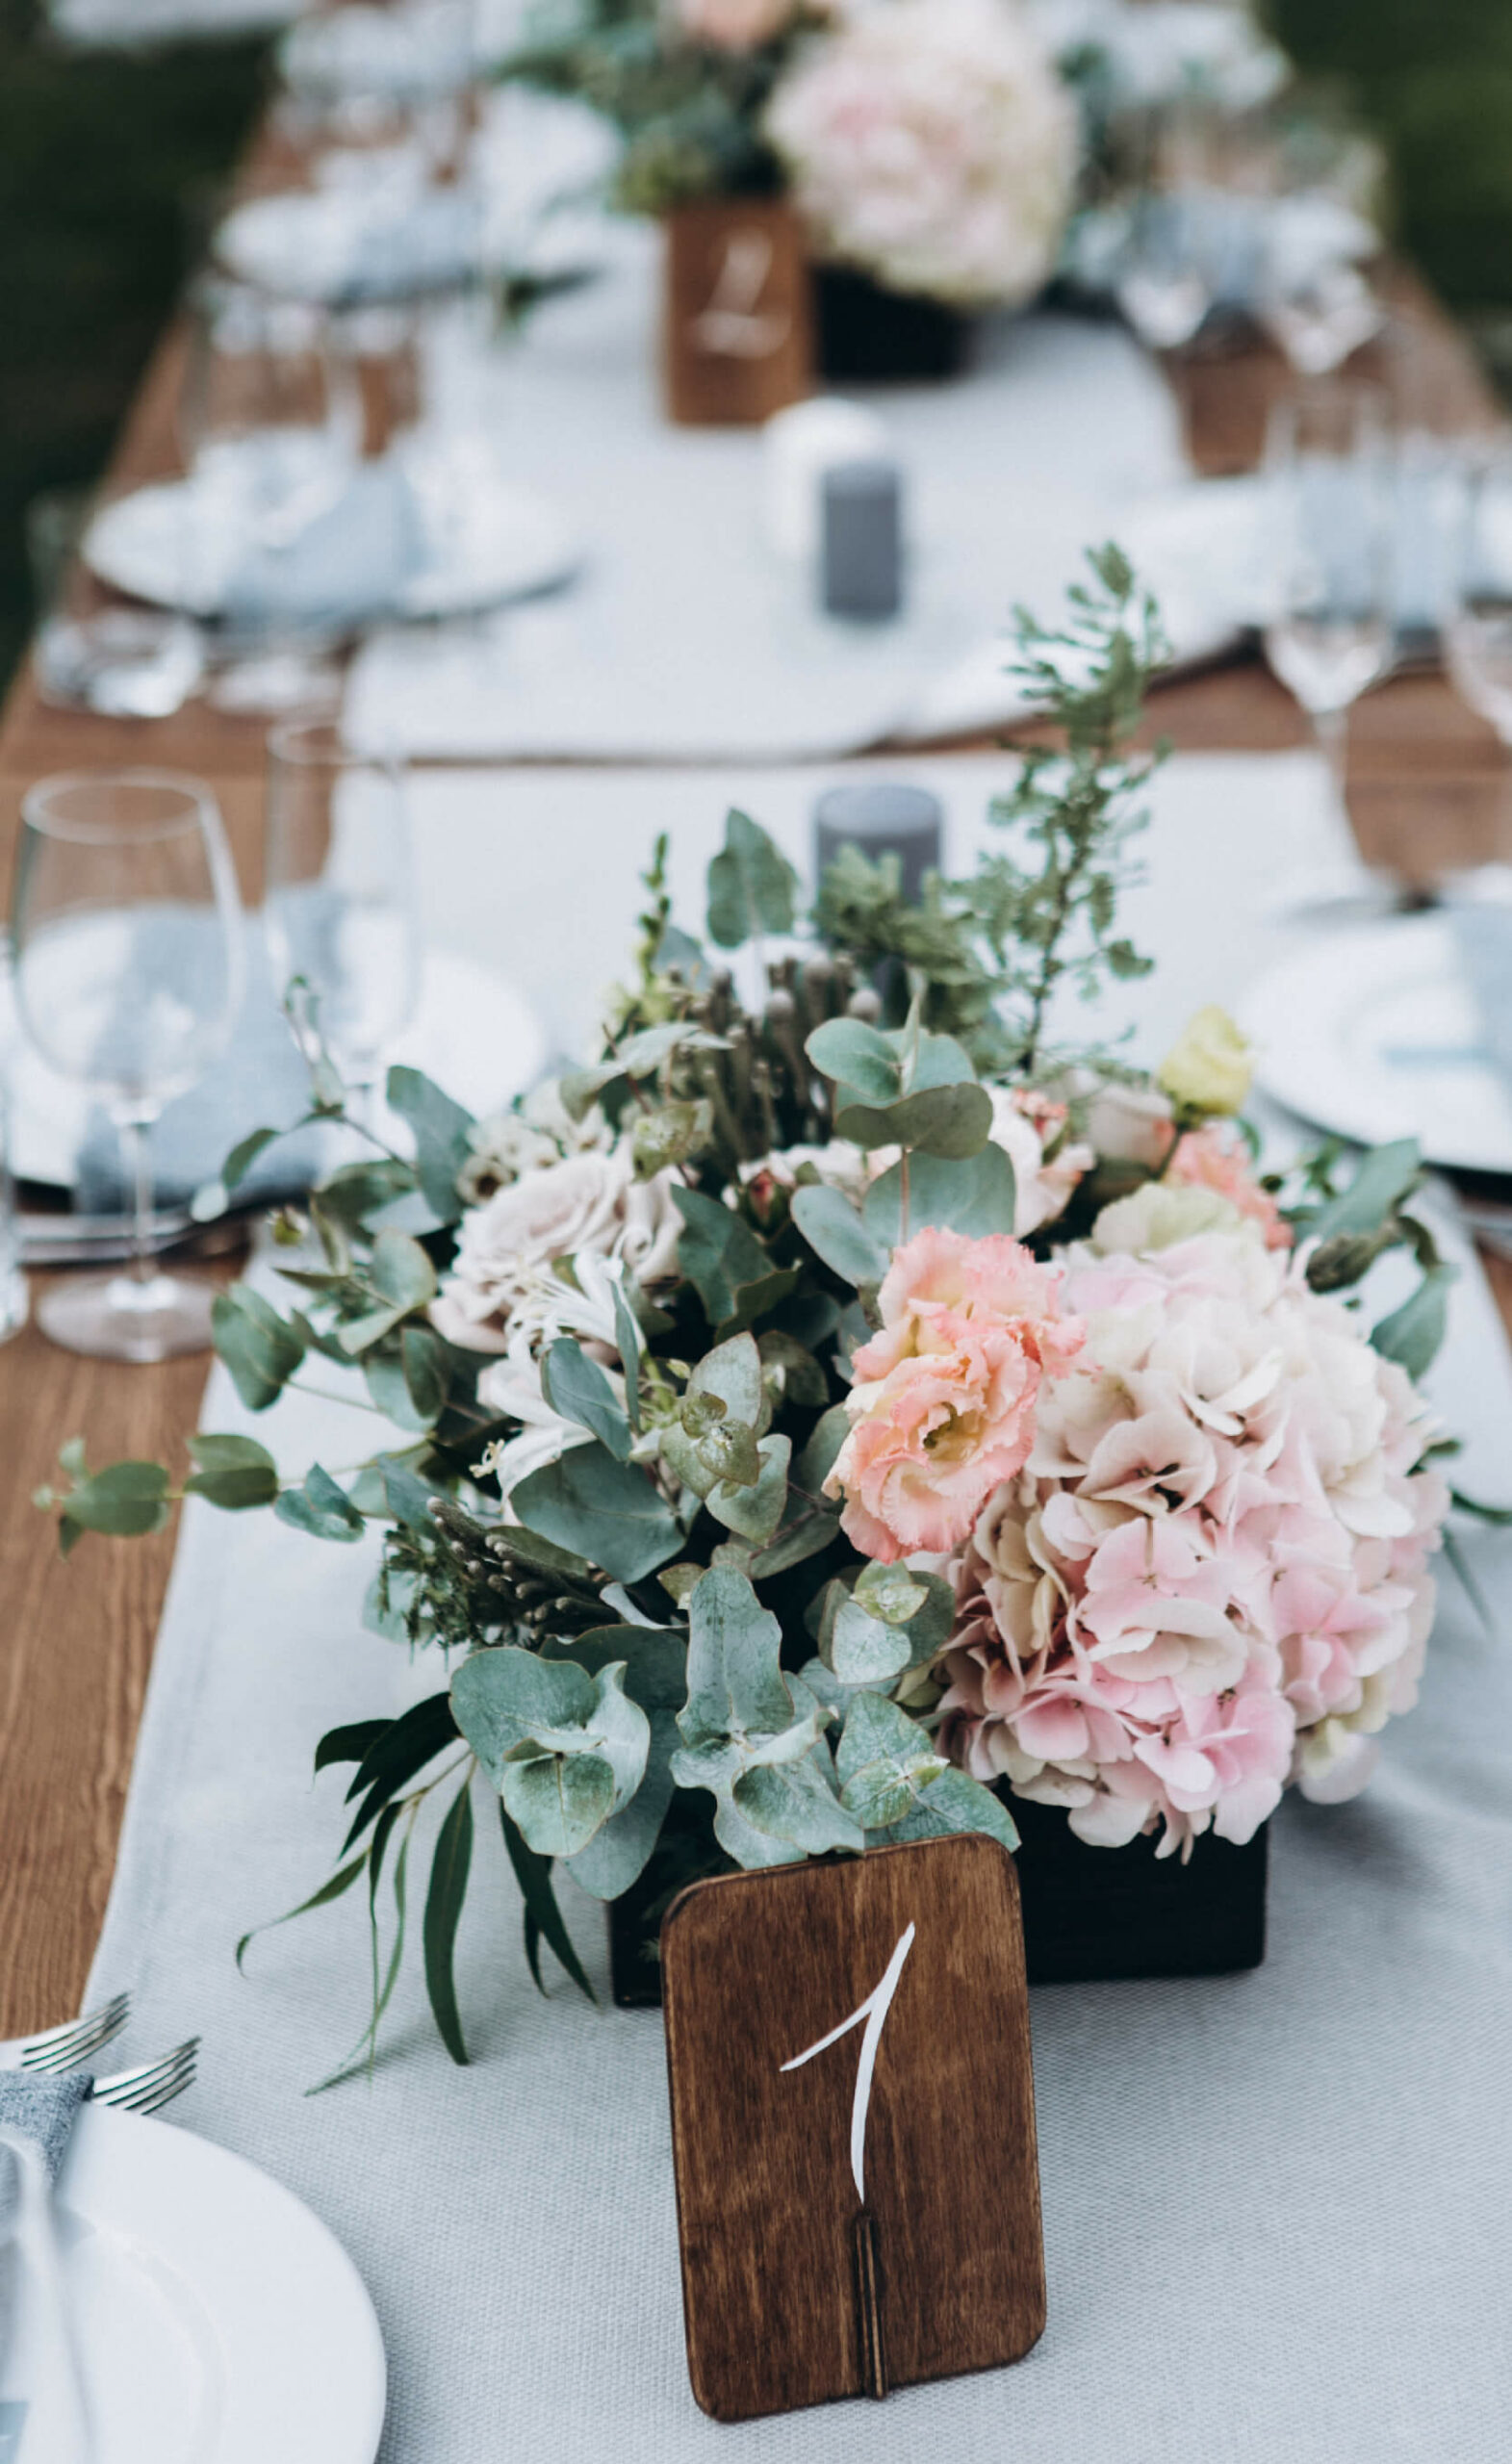 image of a wedding table centerpiece